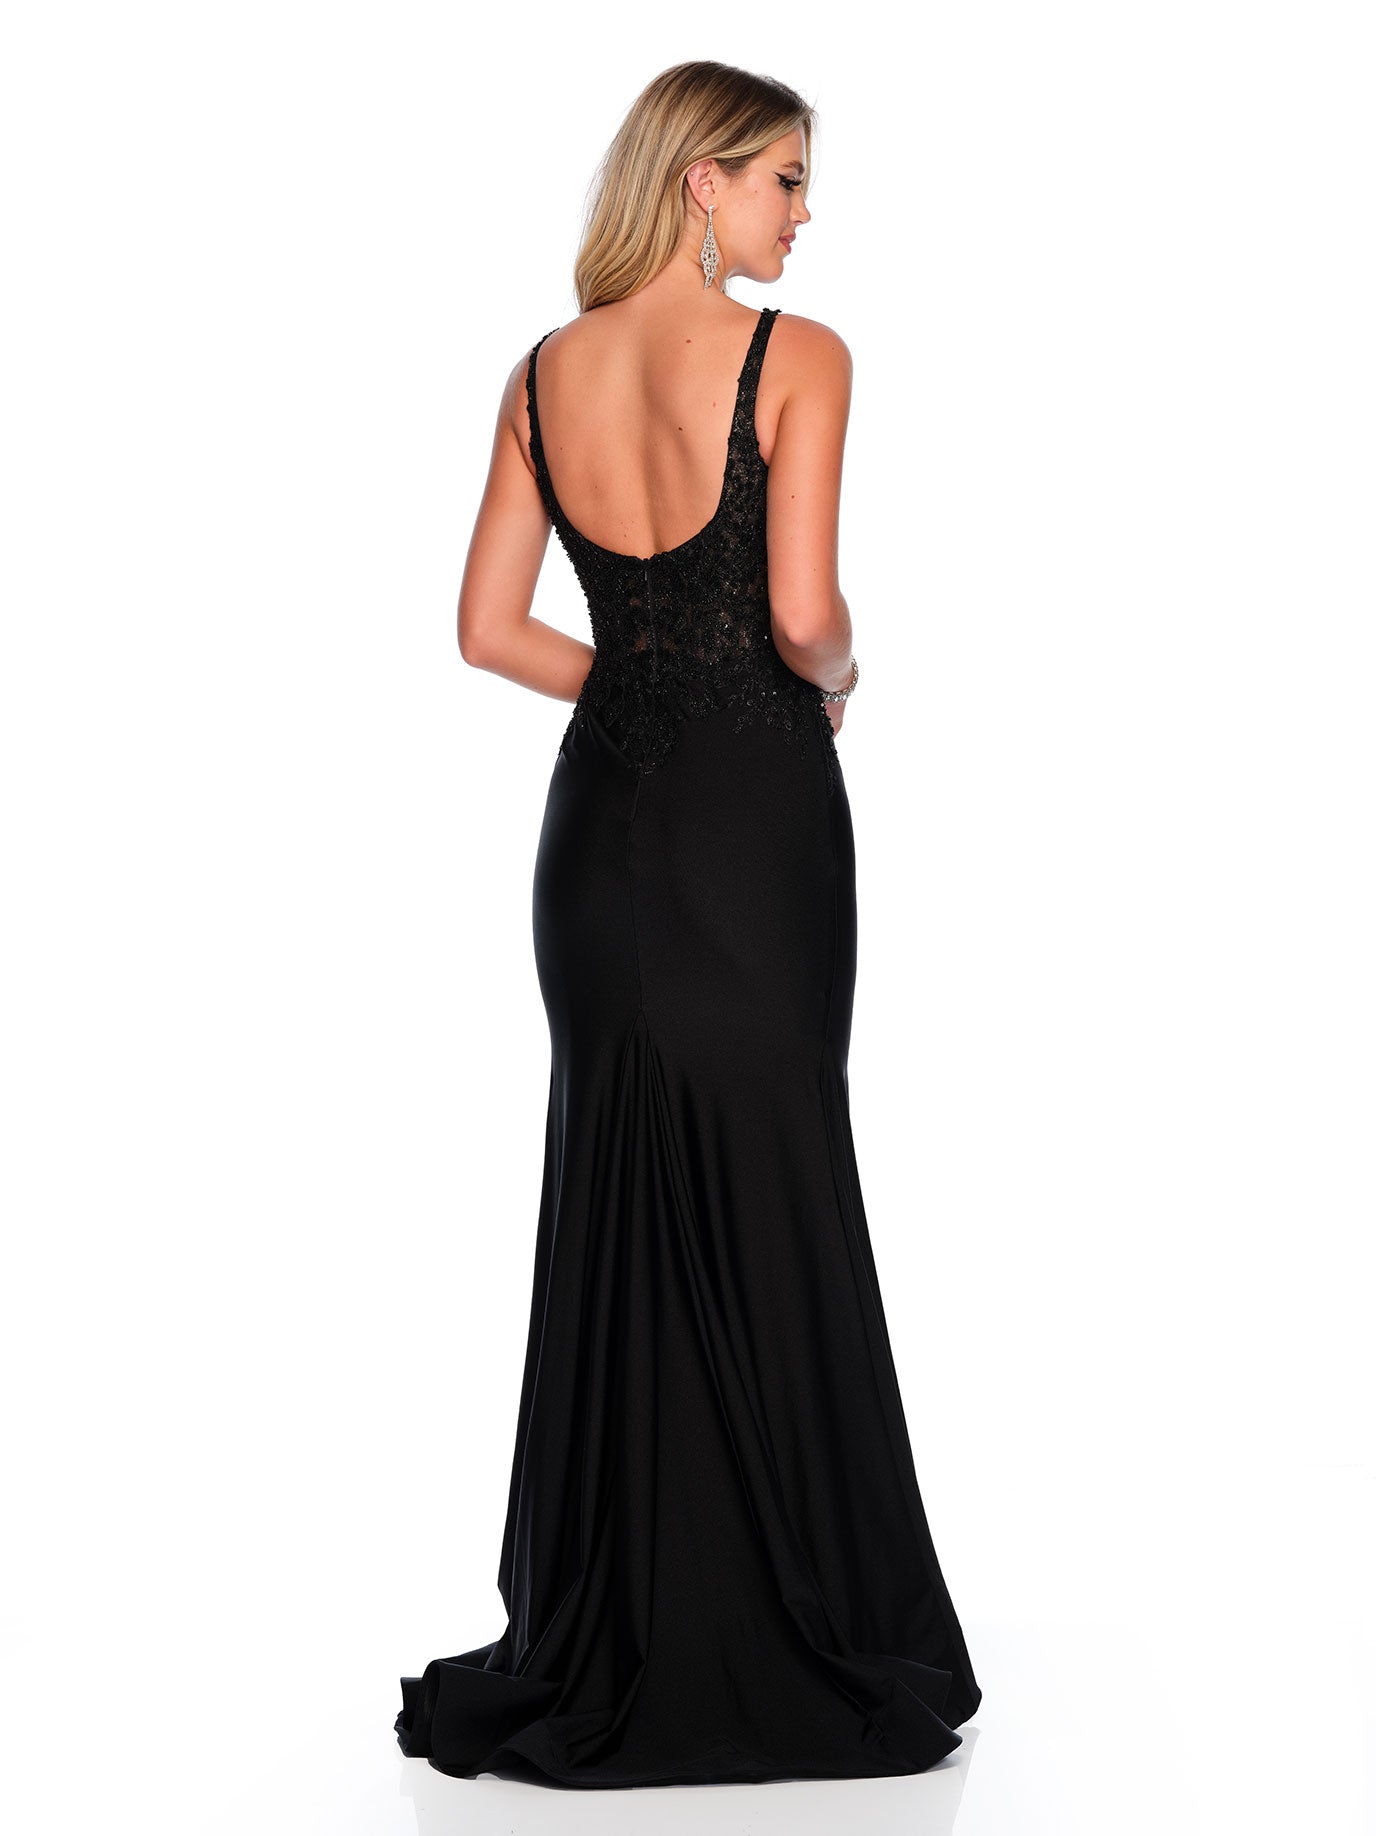 SCOOP NECK BEADED FITTED GOWN PLUS SIZE